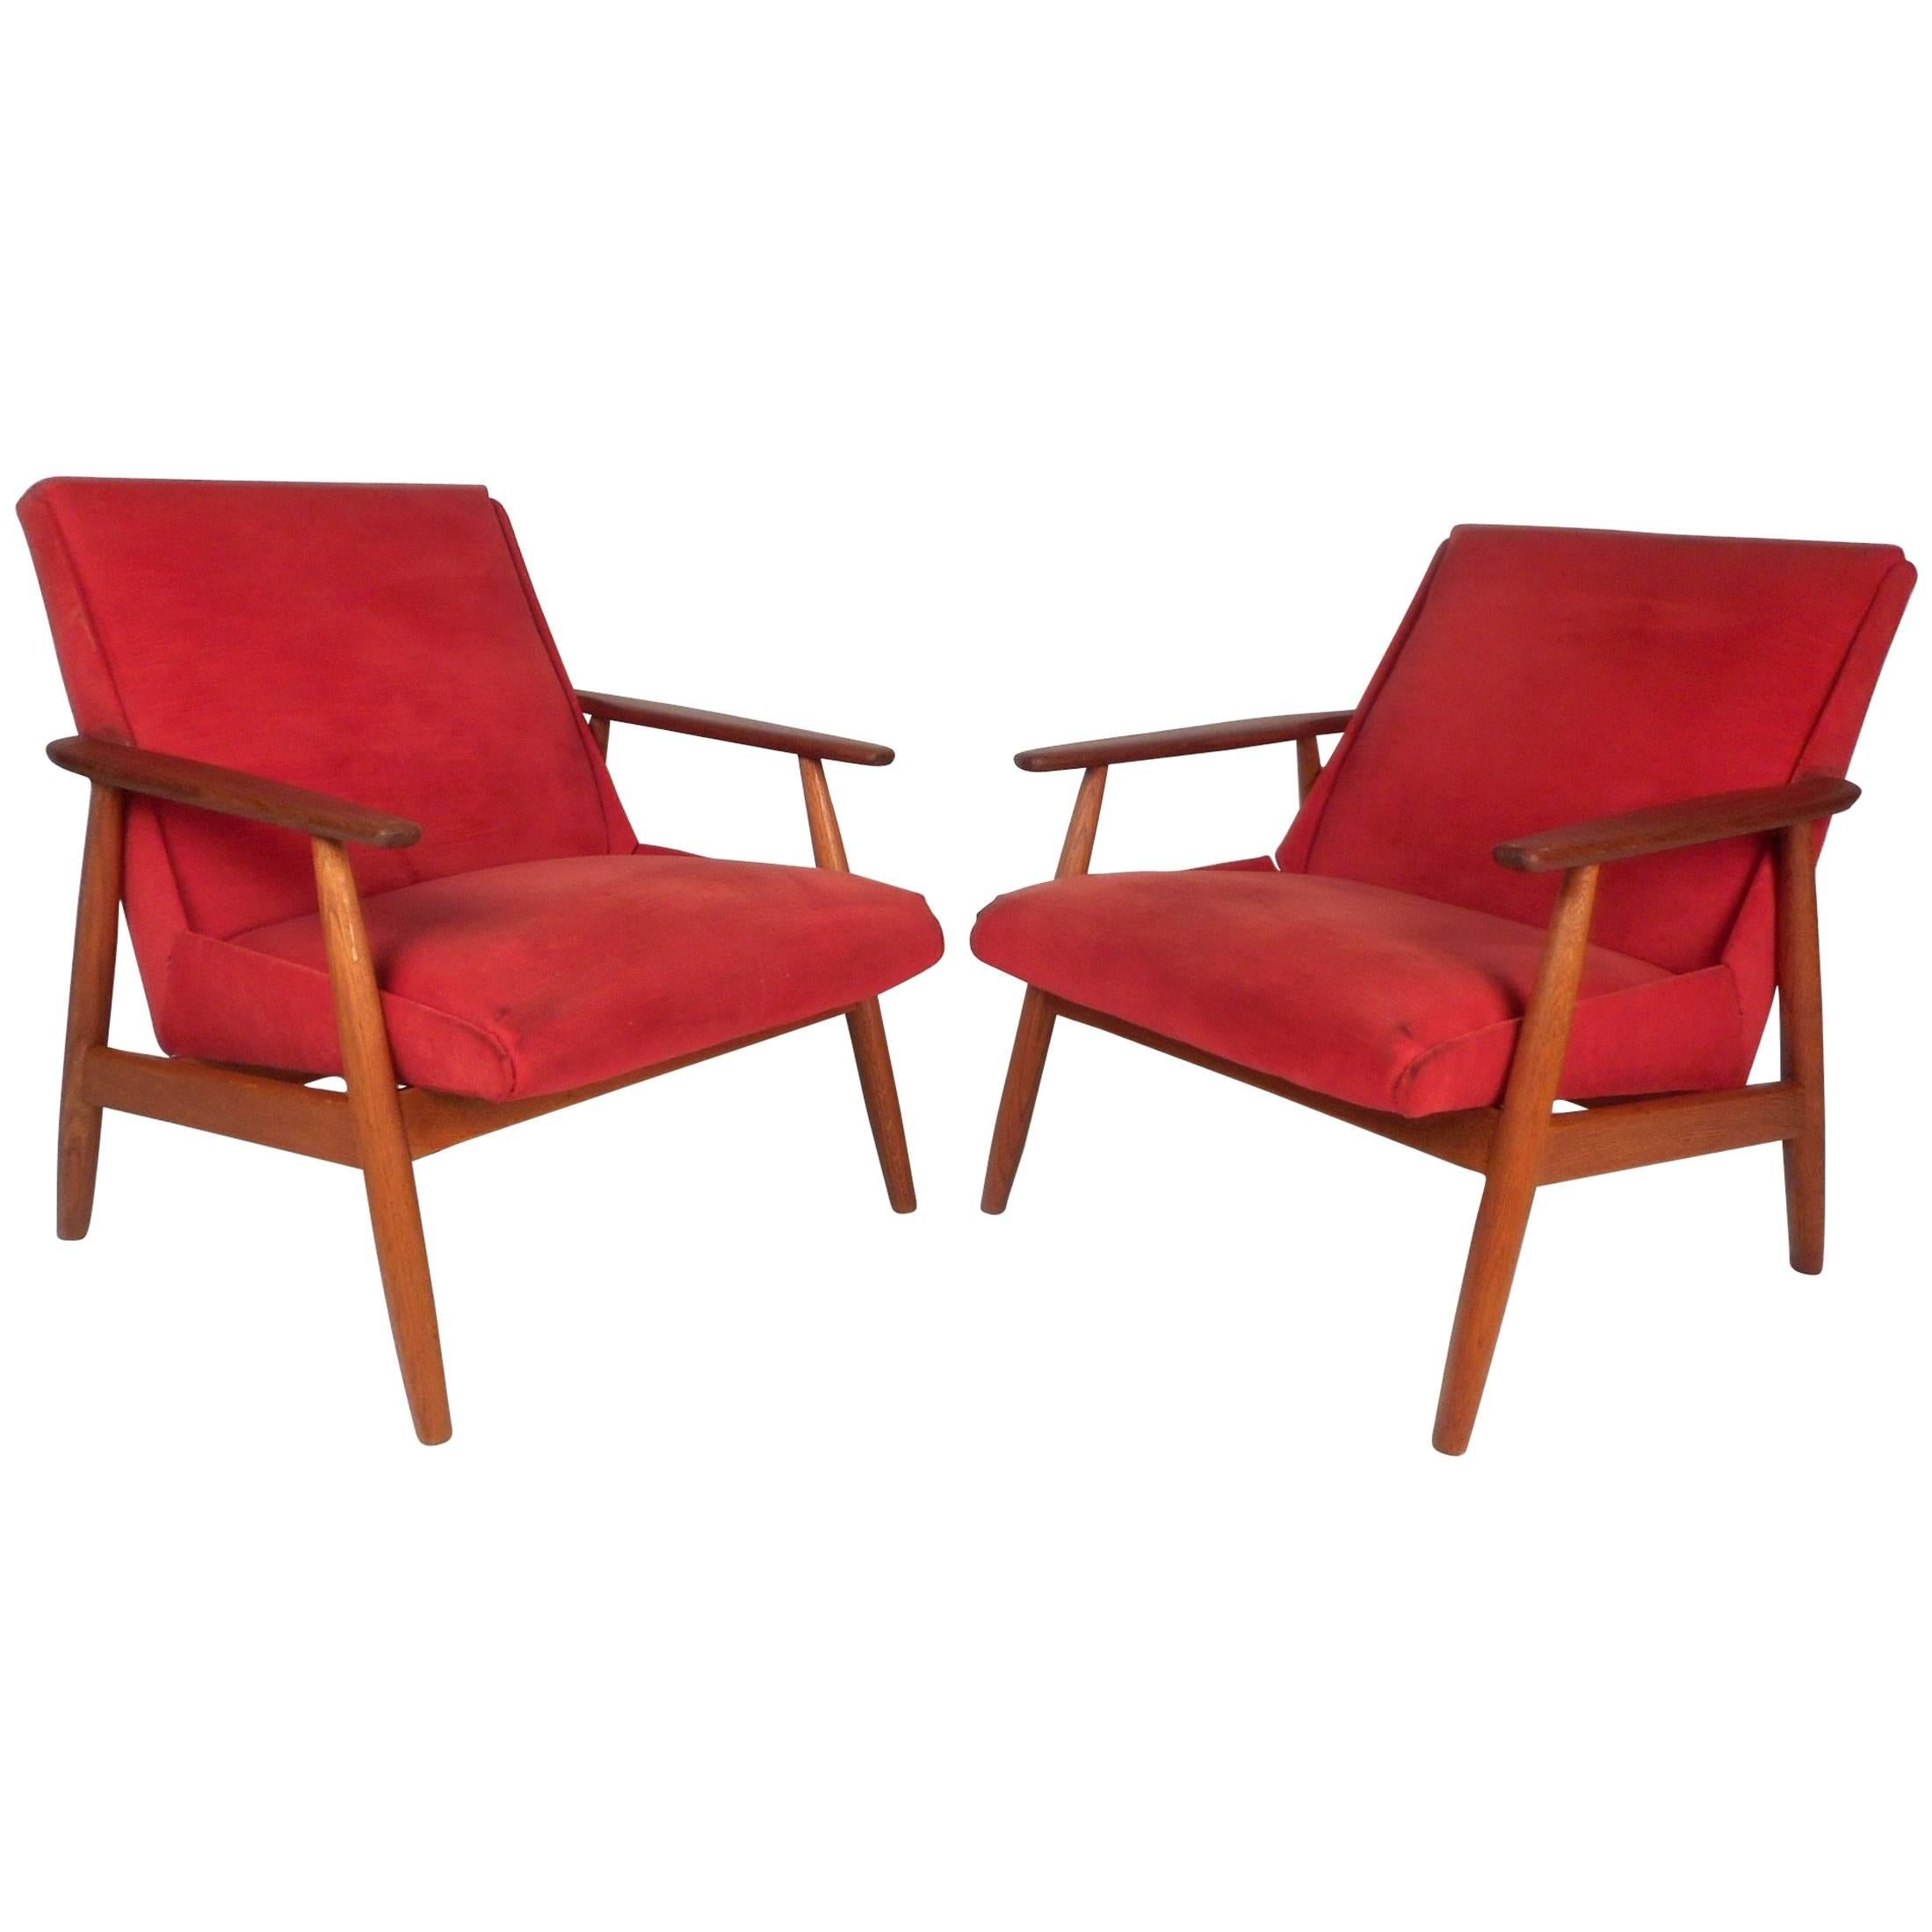 Pair of Vintage Modern Lounge Chairs